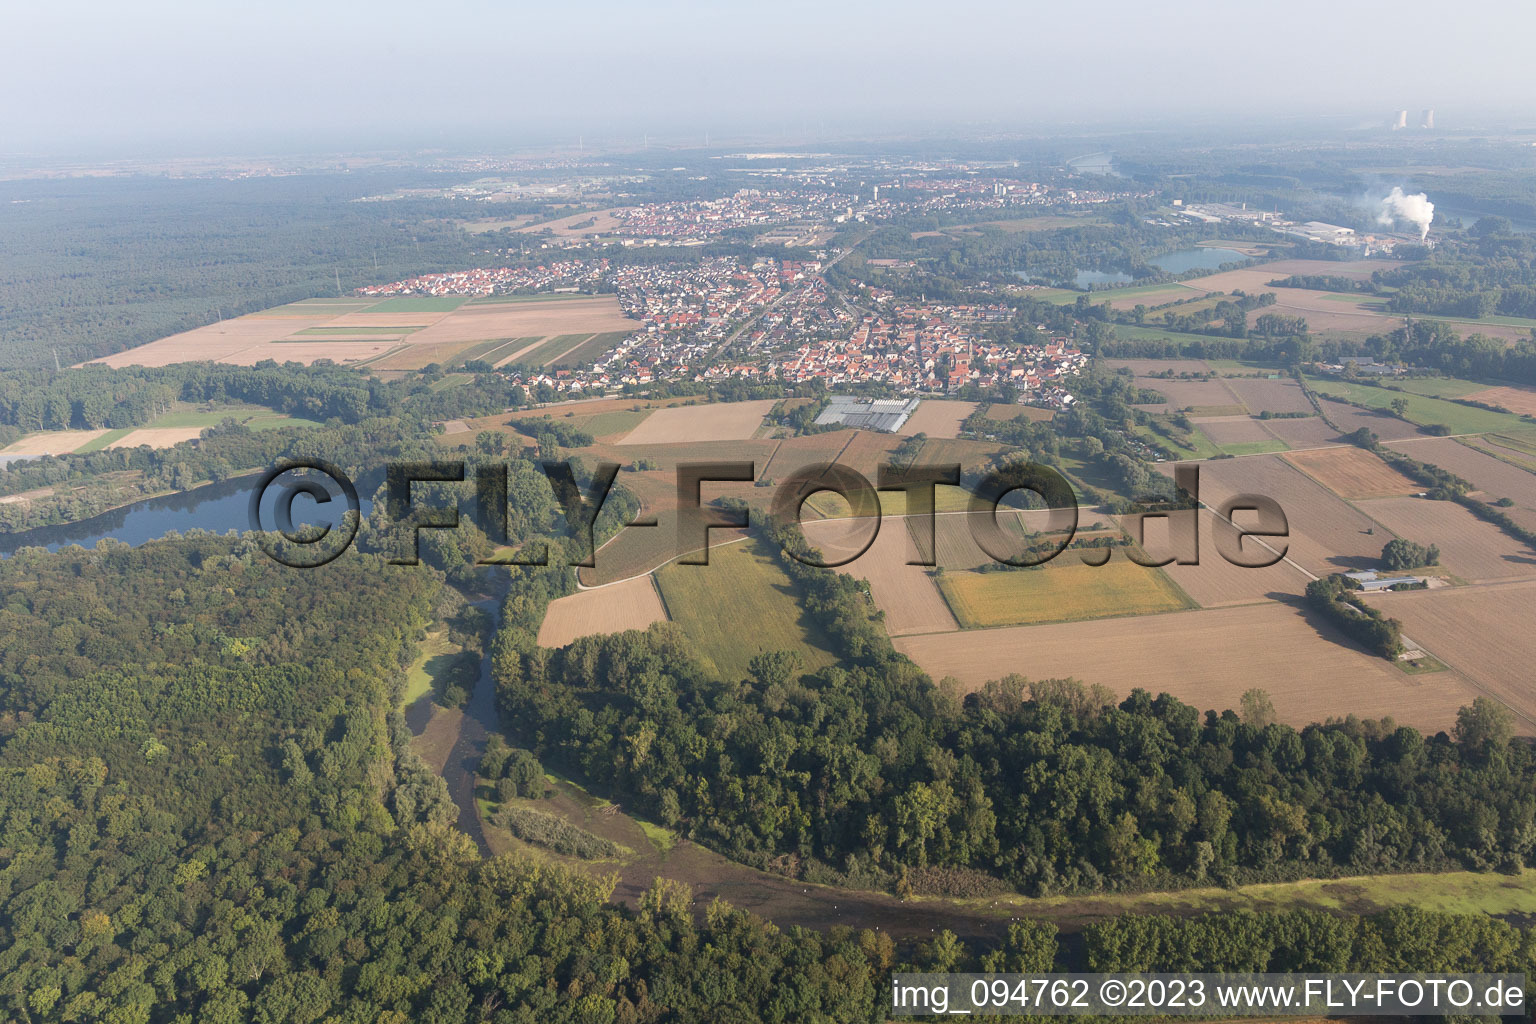 District Sondernheim in Germersheim in the state Rhineland-Palatinate, Germany from a drone